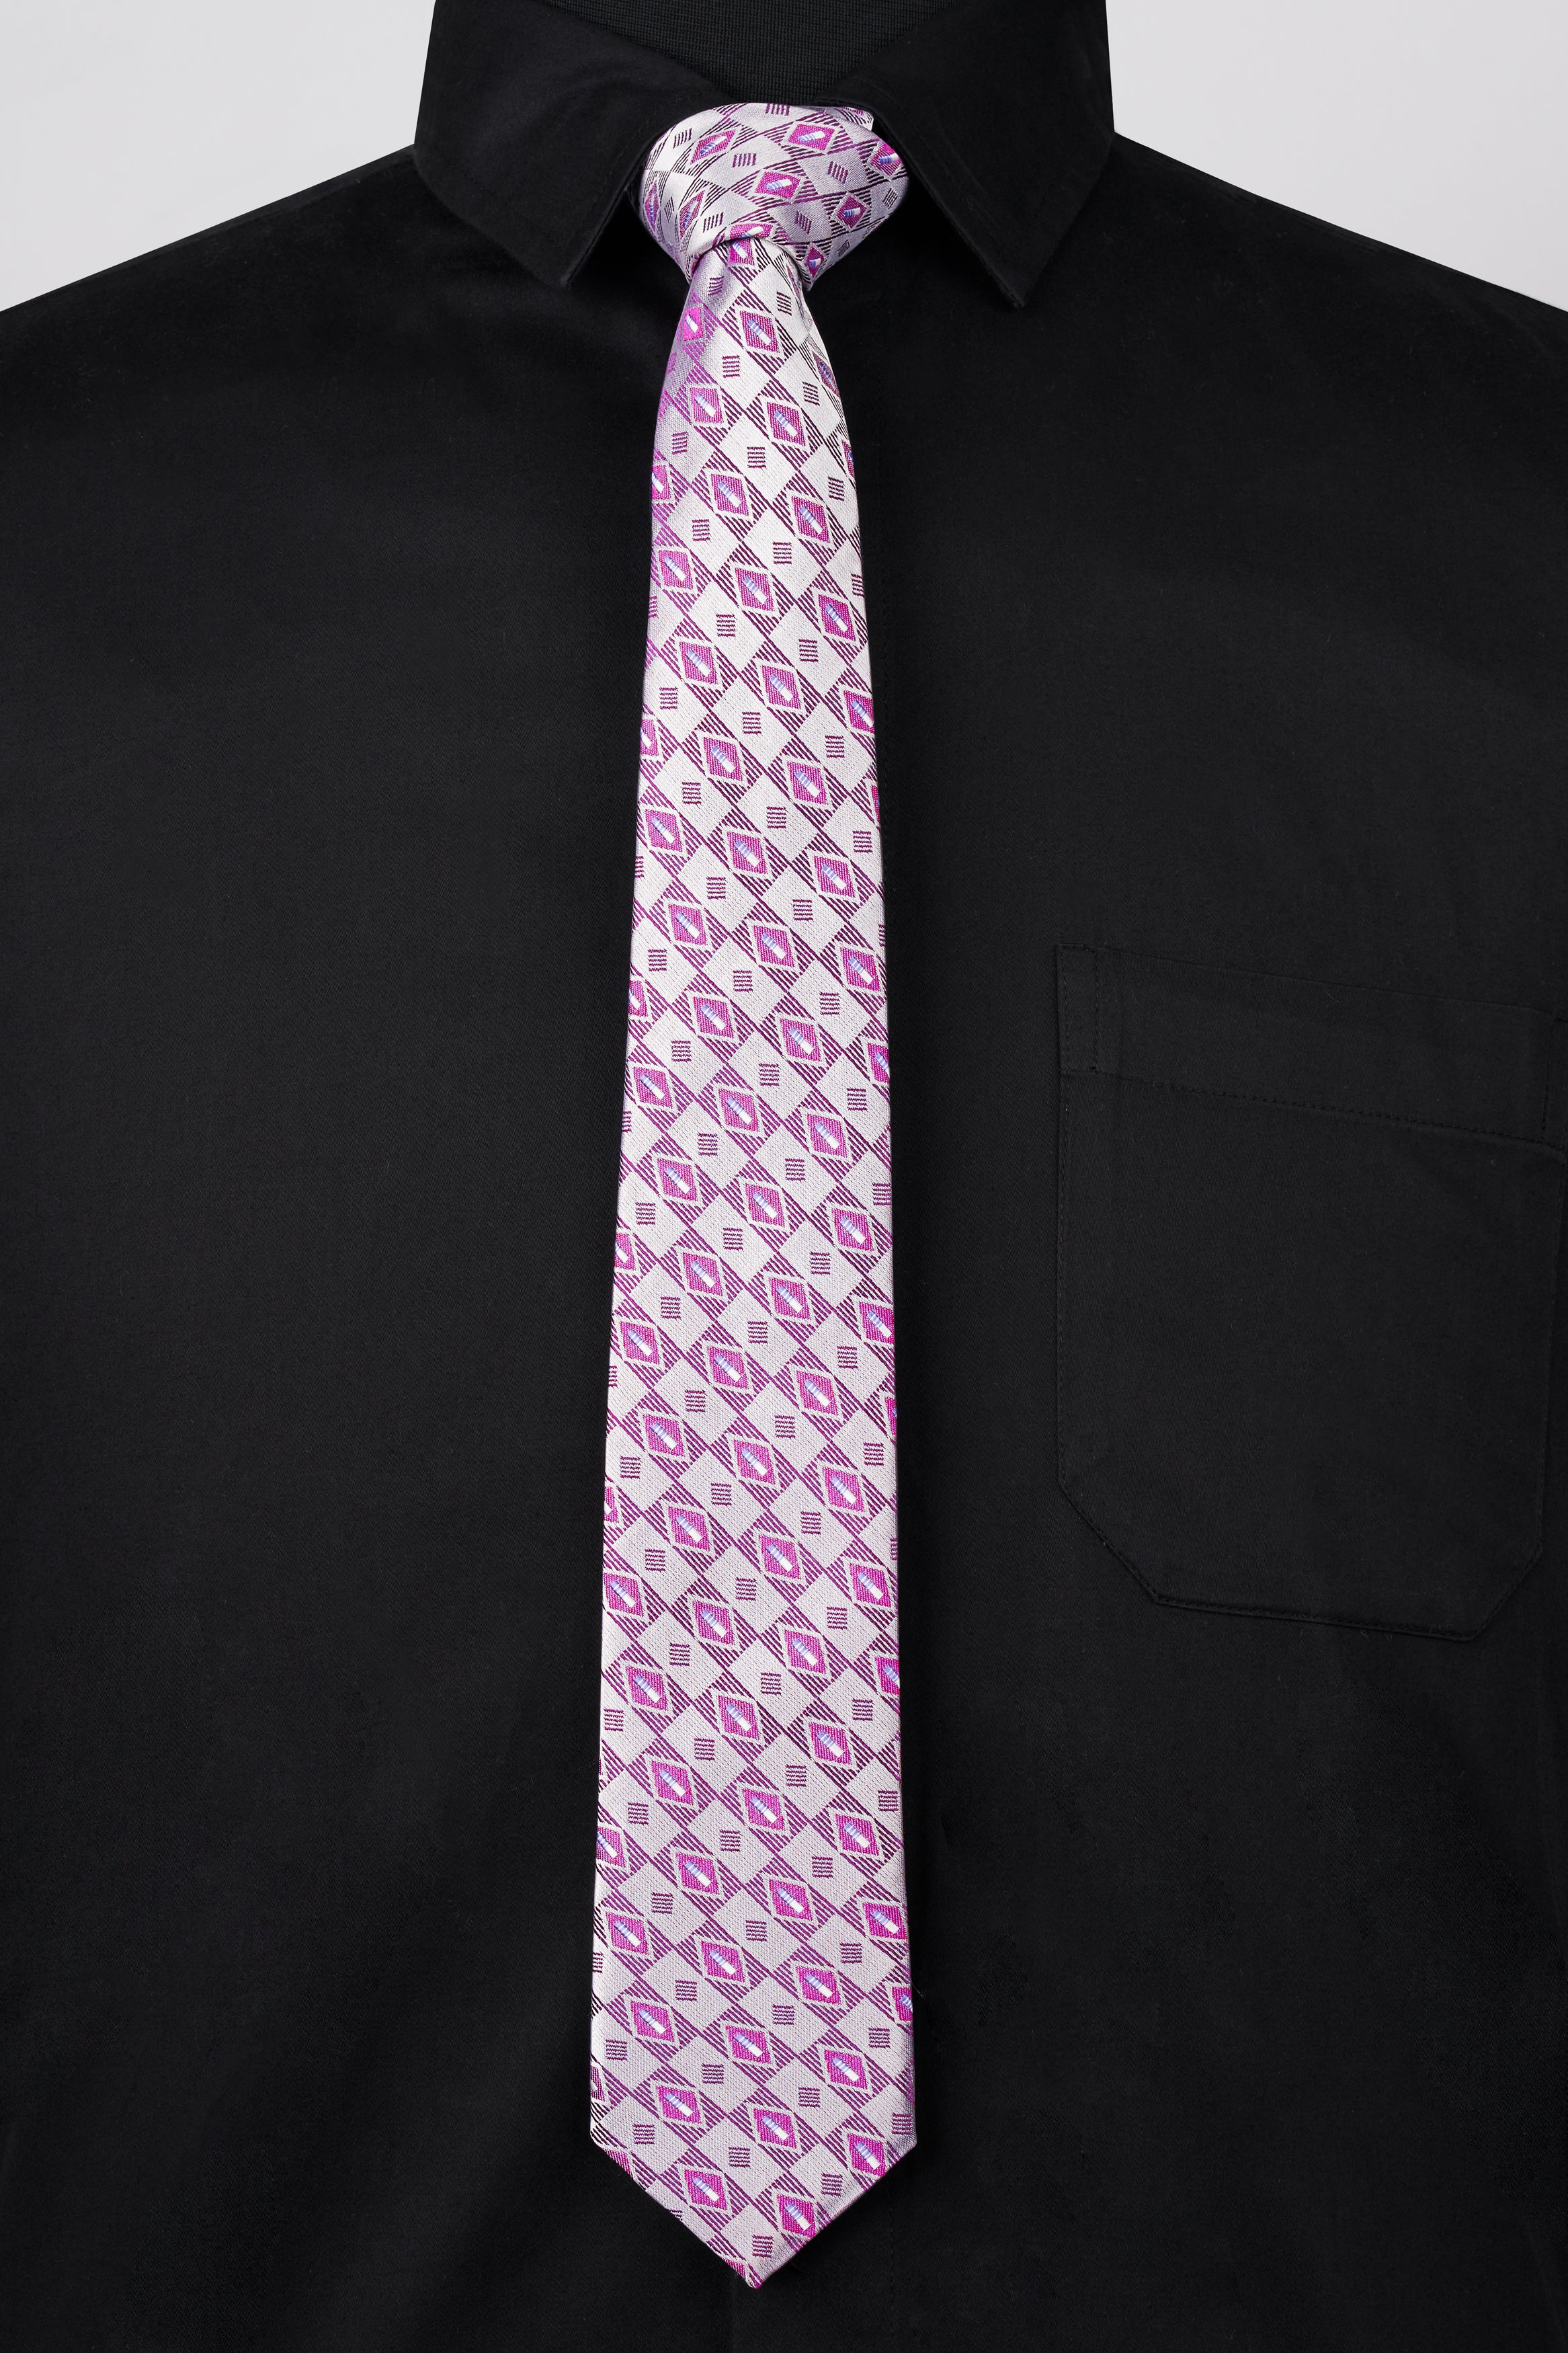 Mischka Gray with Plum Purple Jacquard Tie with Pocket Square TP045